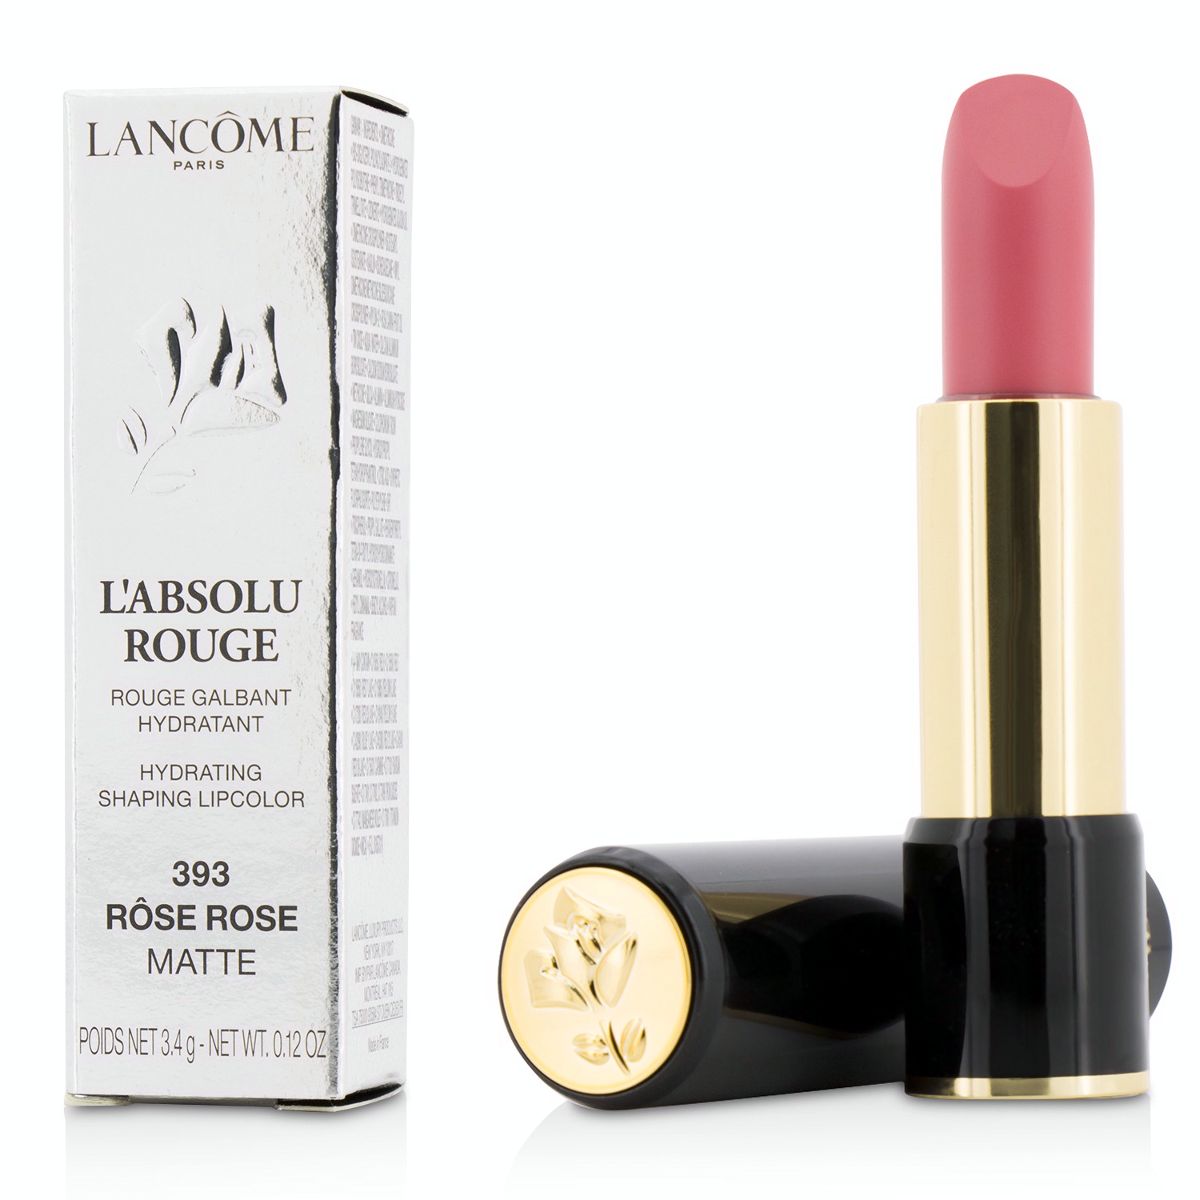 L Absolu Rouge Hydrating Shaping Lipcolor - # 393 Rose Rose (Matte) Lancome Image